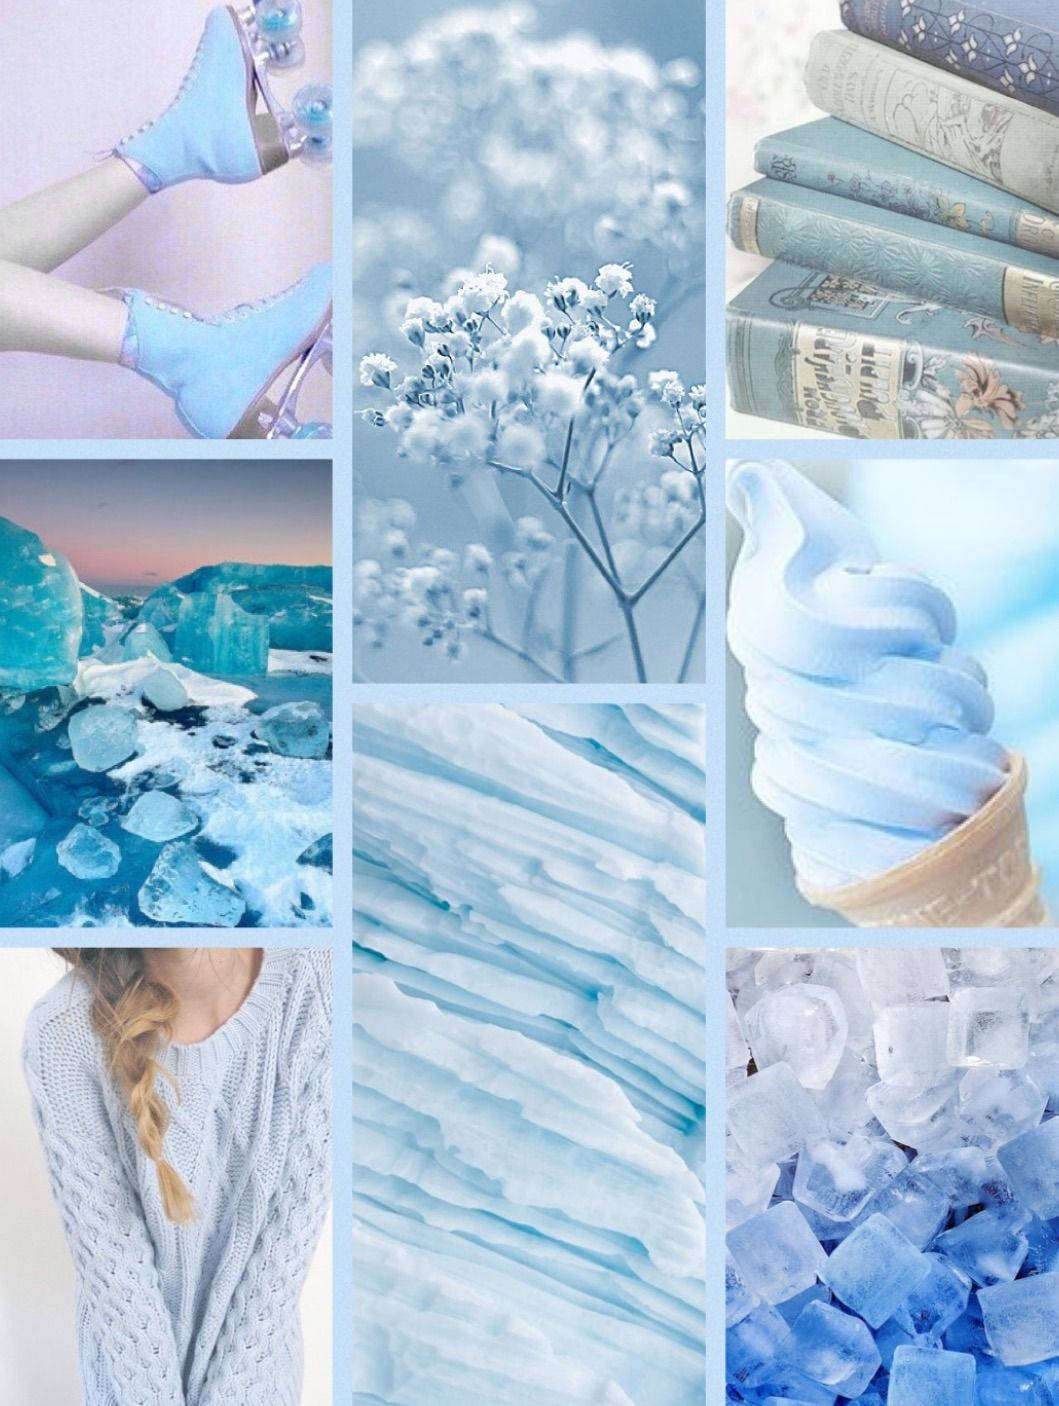 Exquisite Periwinkle Blue Ice on a cold day Wallpaper